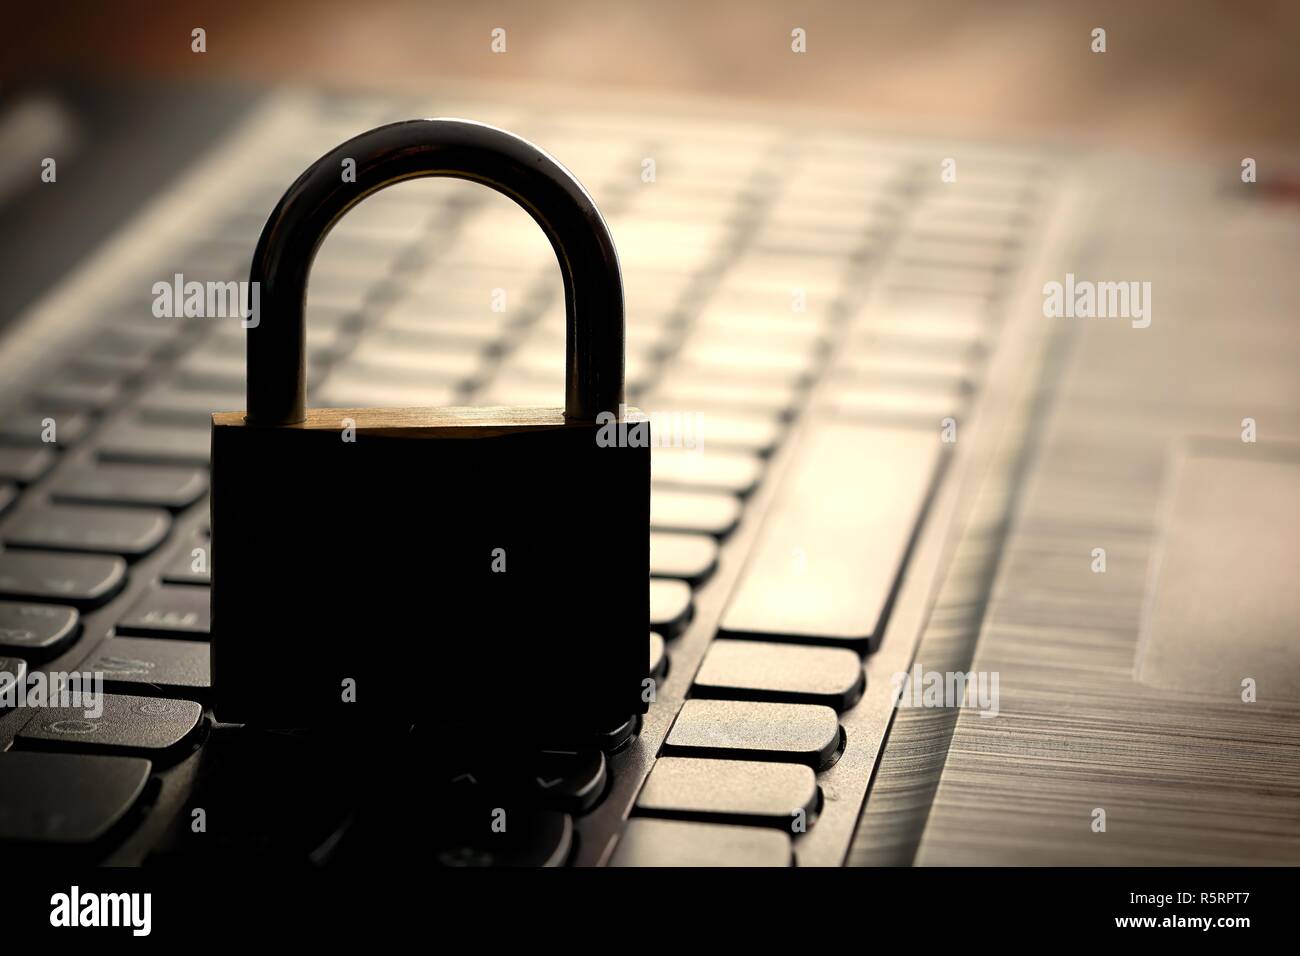 computer keyboard and padlock as a symbol of internet security Stock Photo